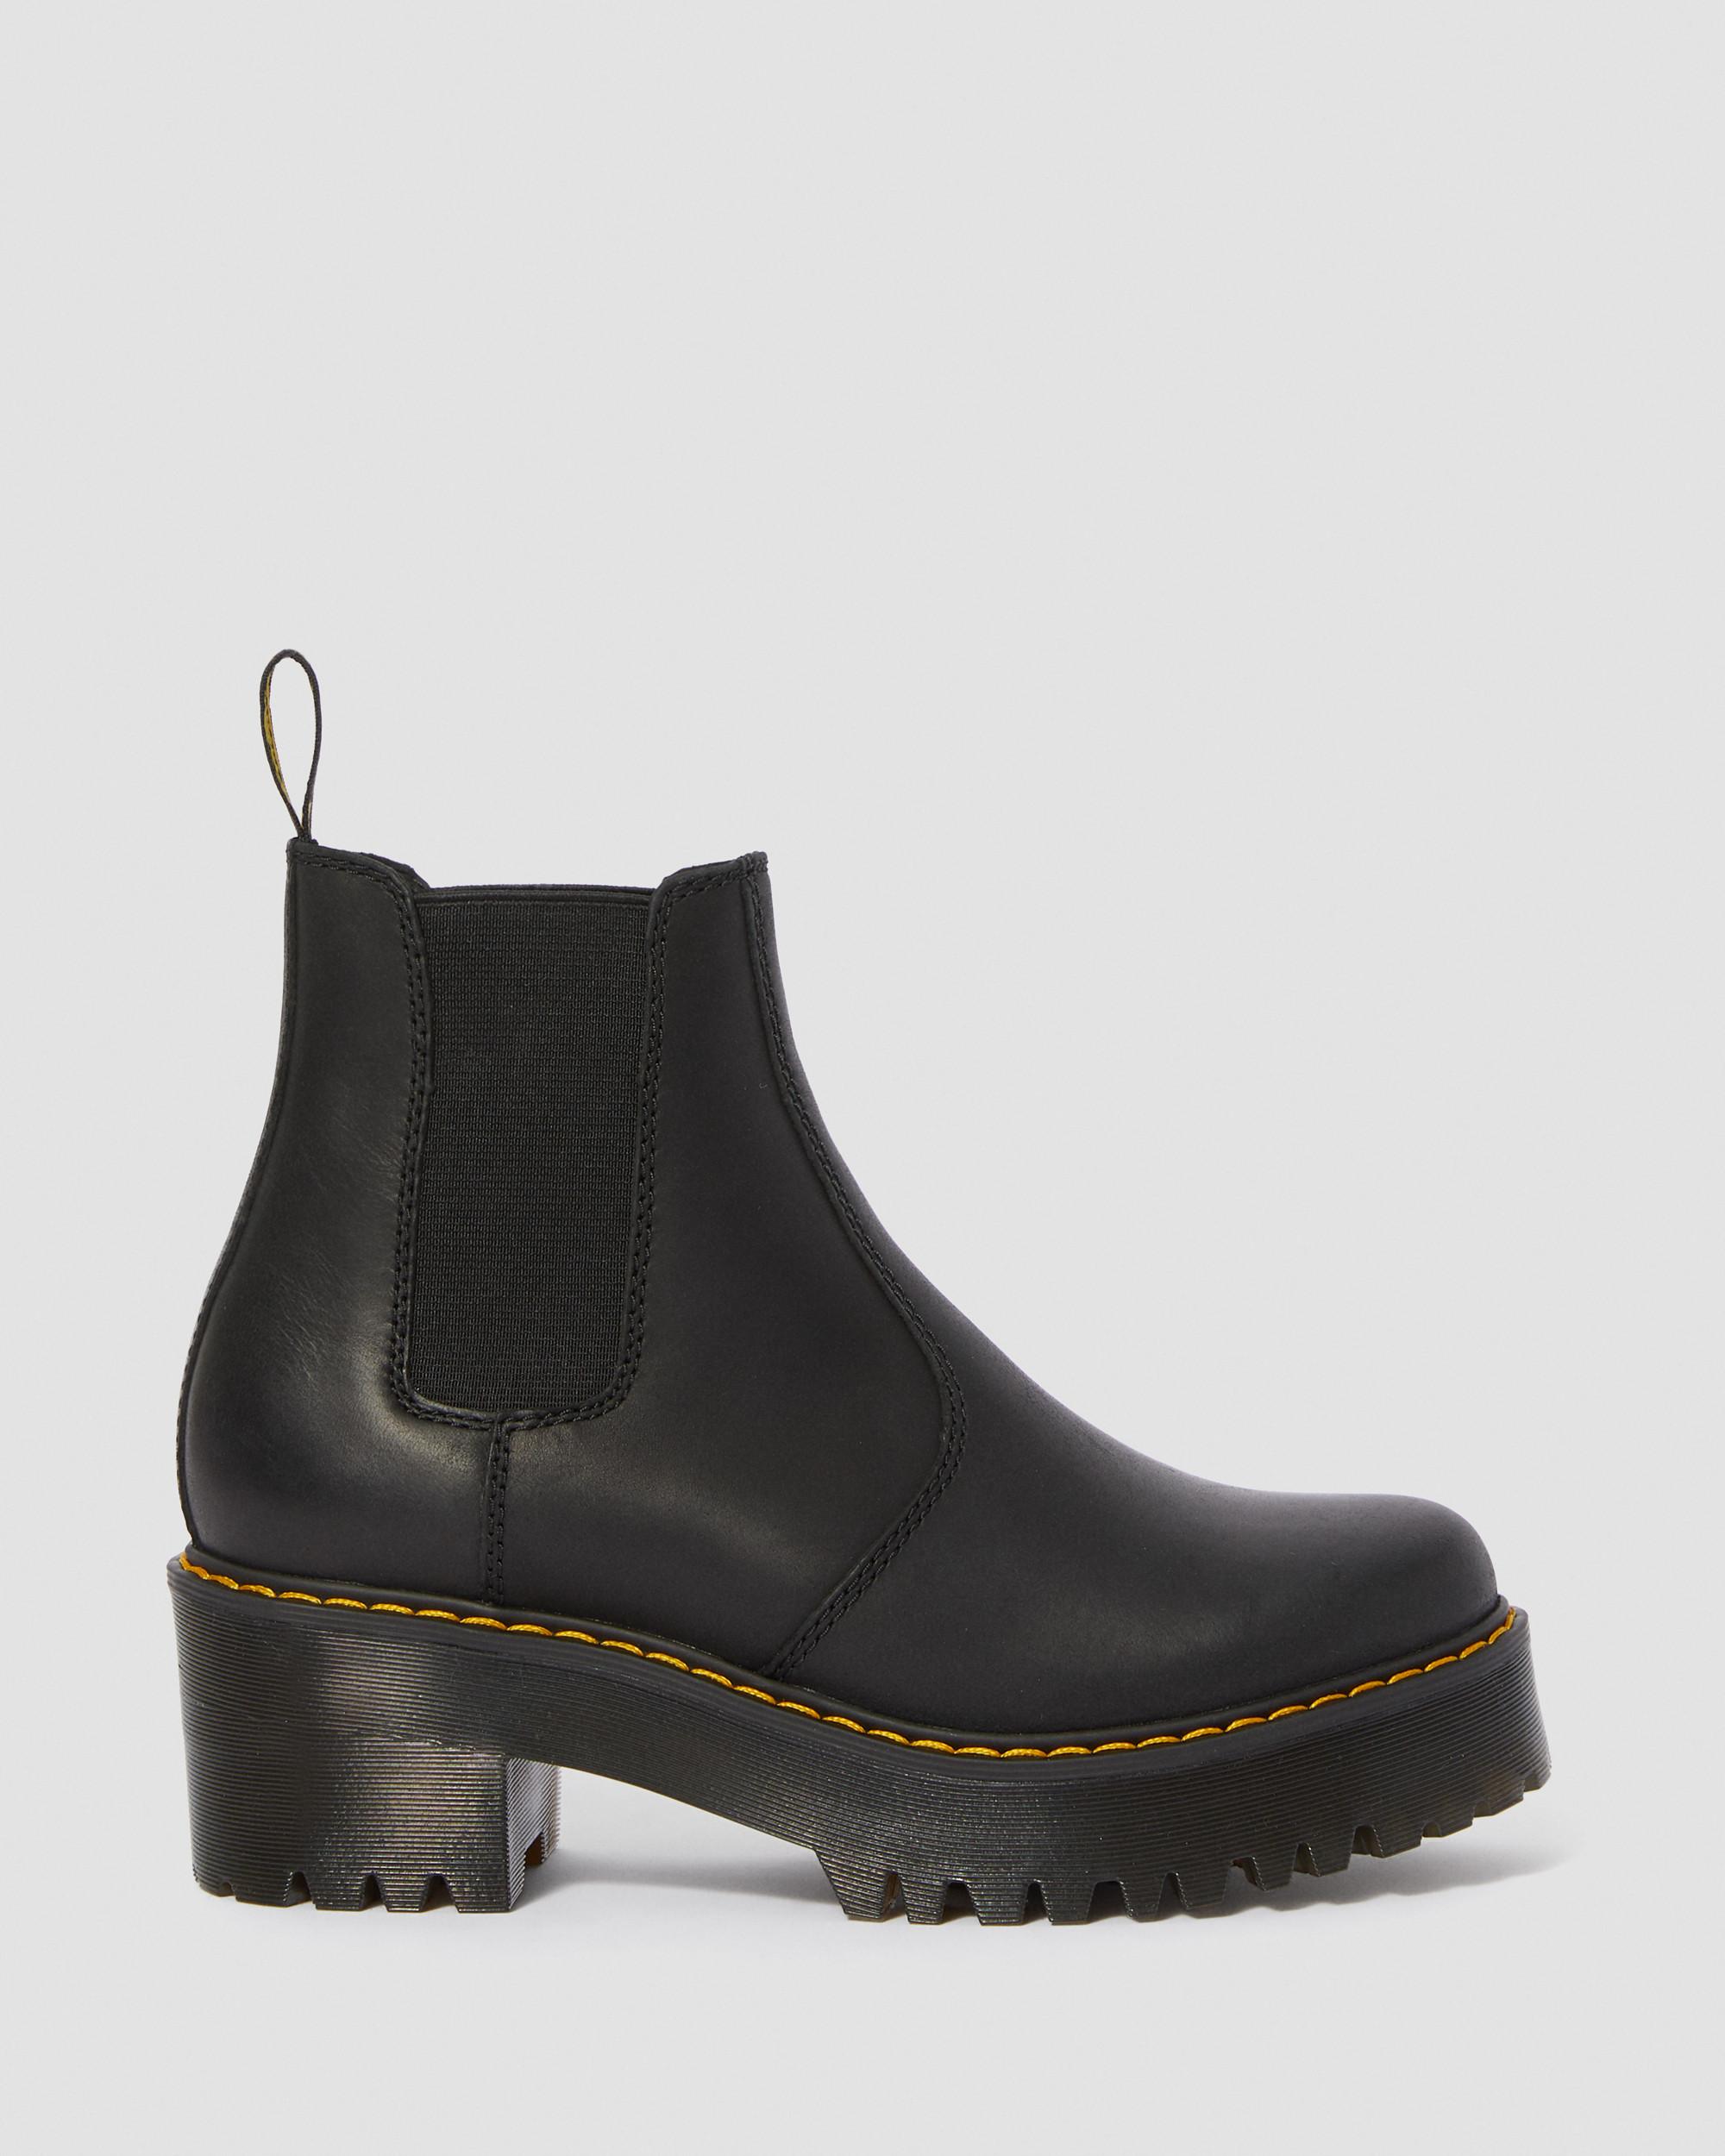 Rometty Wyoming Leather Chelsea Black | Dr. Martens